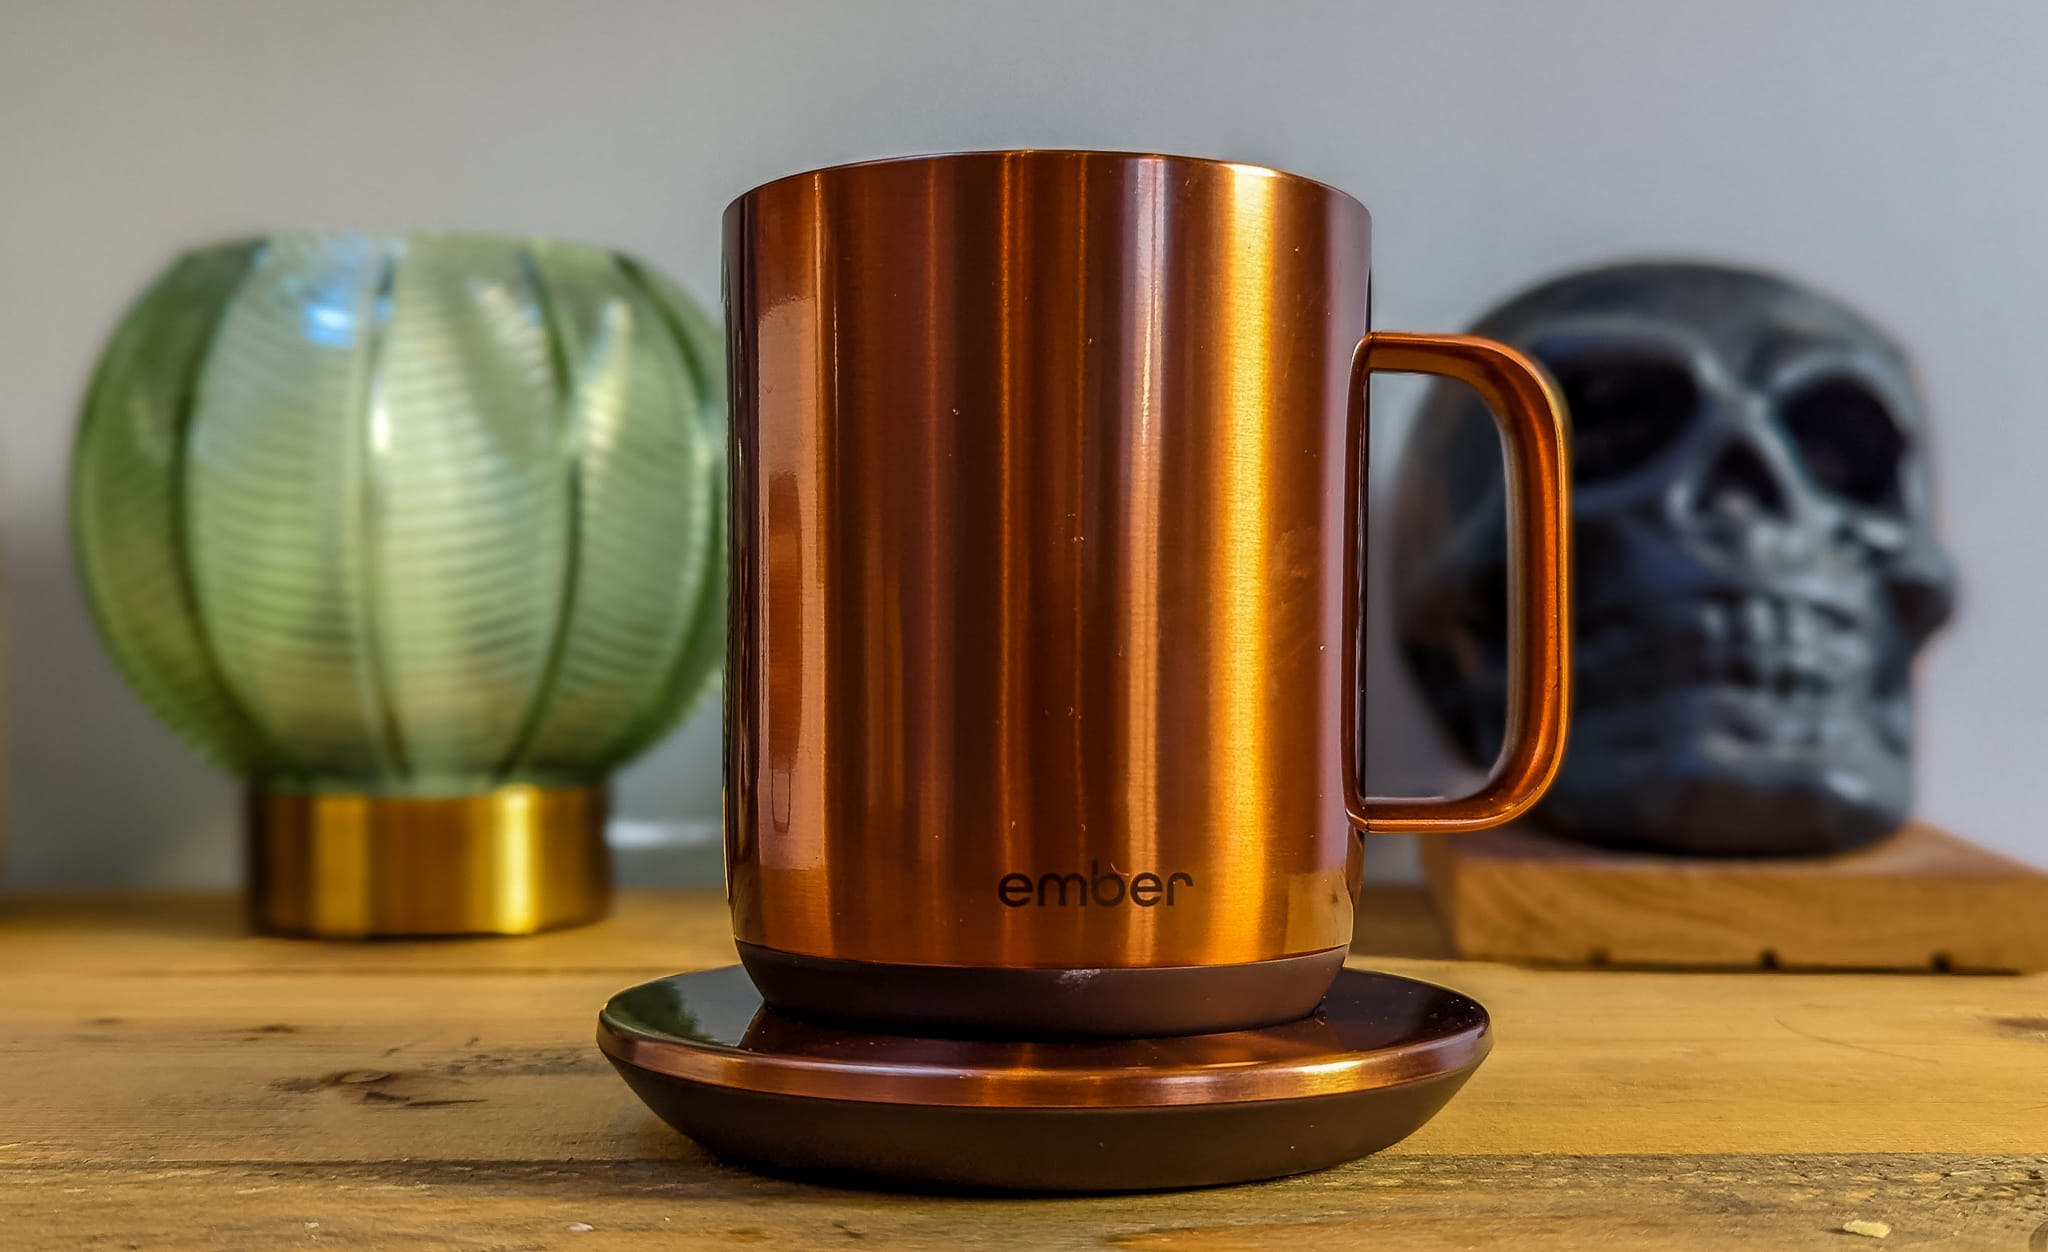 Ember Mug 2 Metallic Review – No more microwaving my cold coffee with this temperature controlled self-heating mug